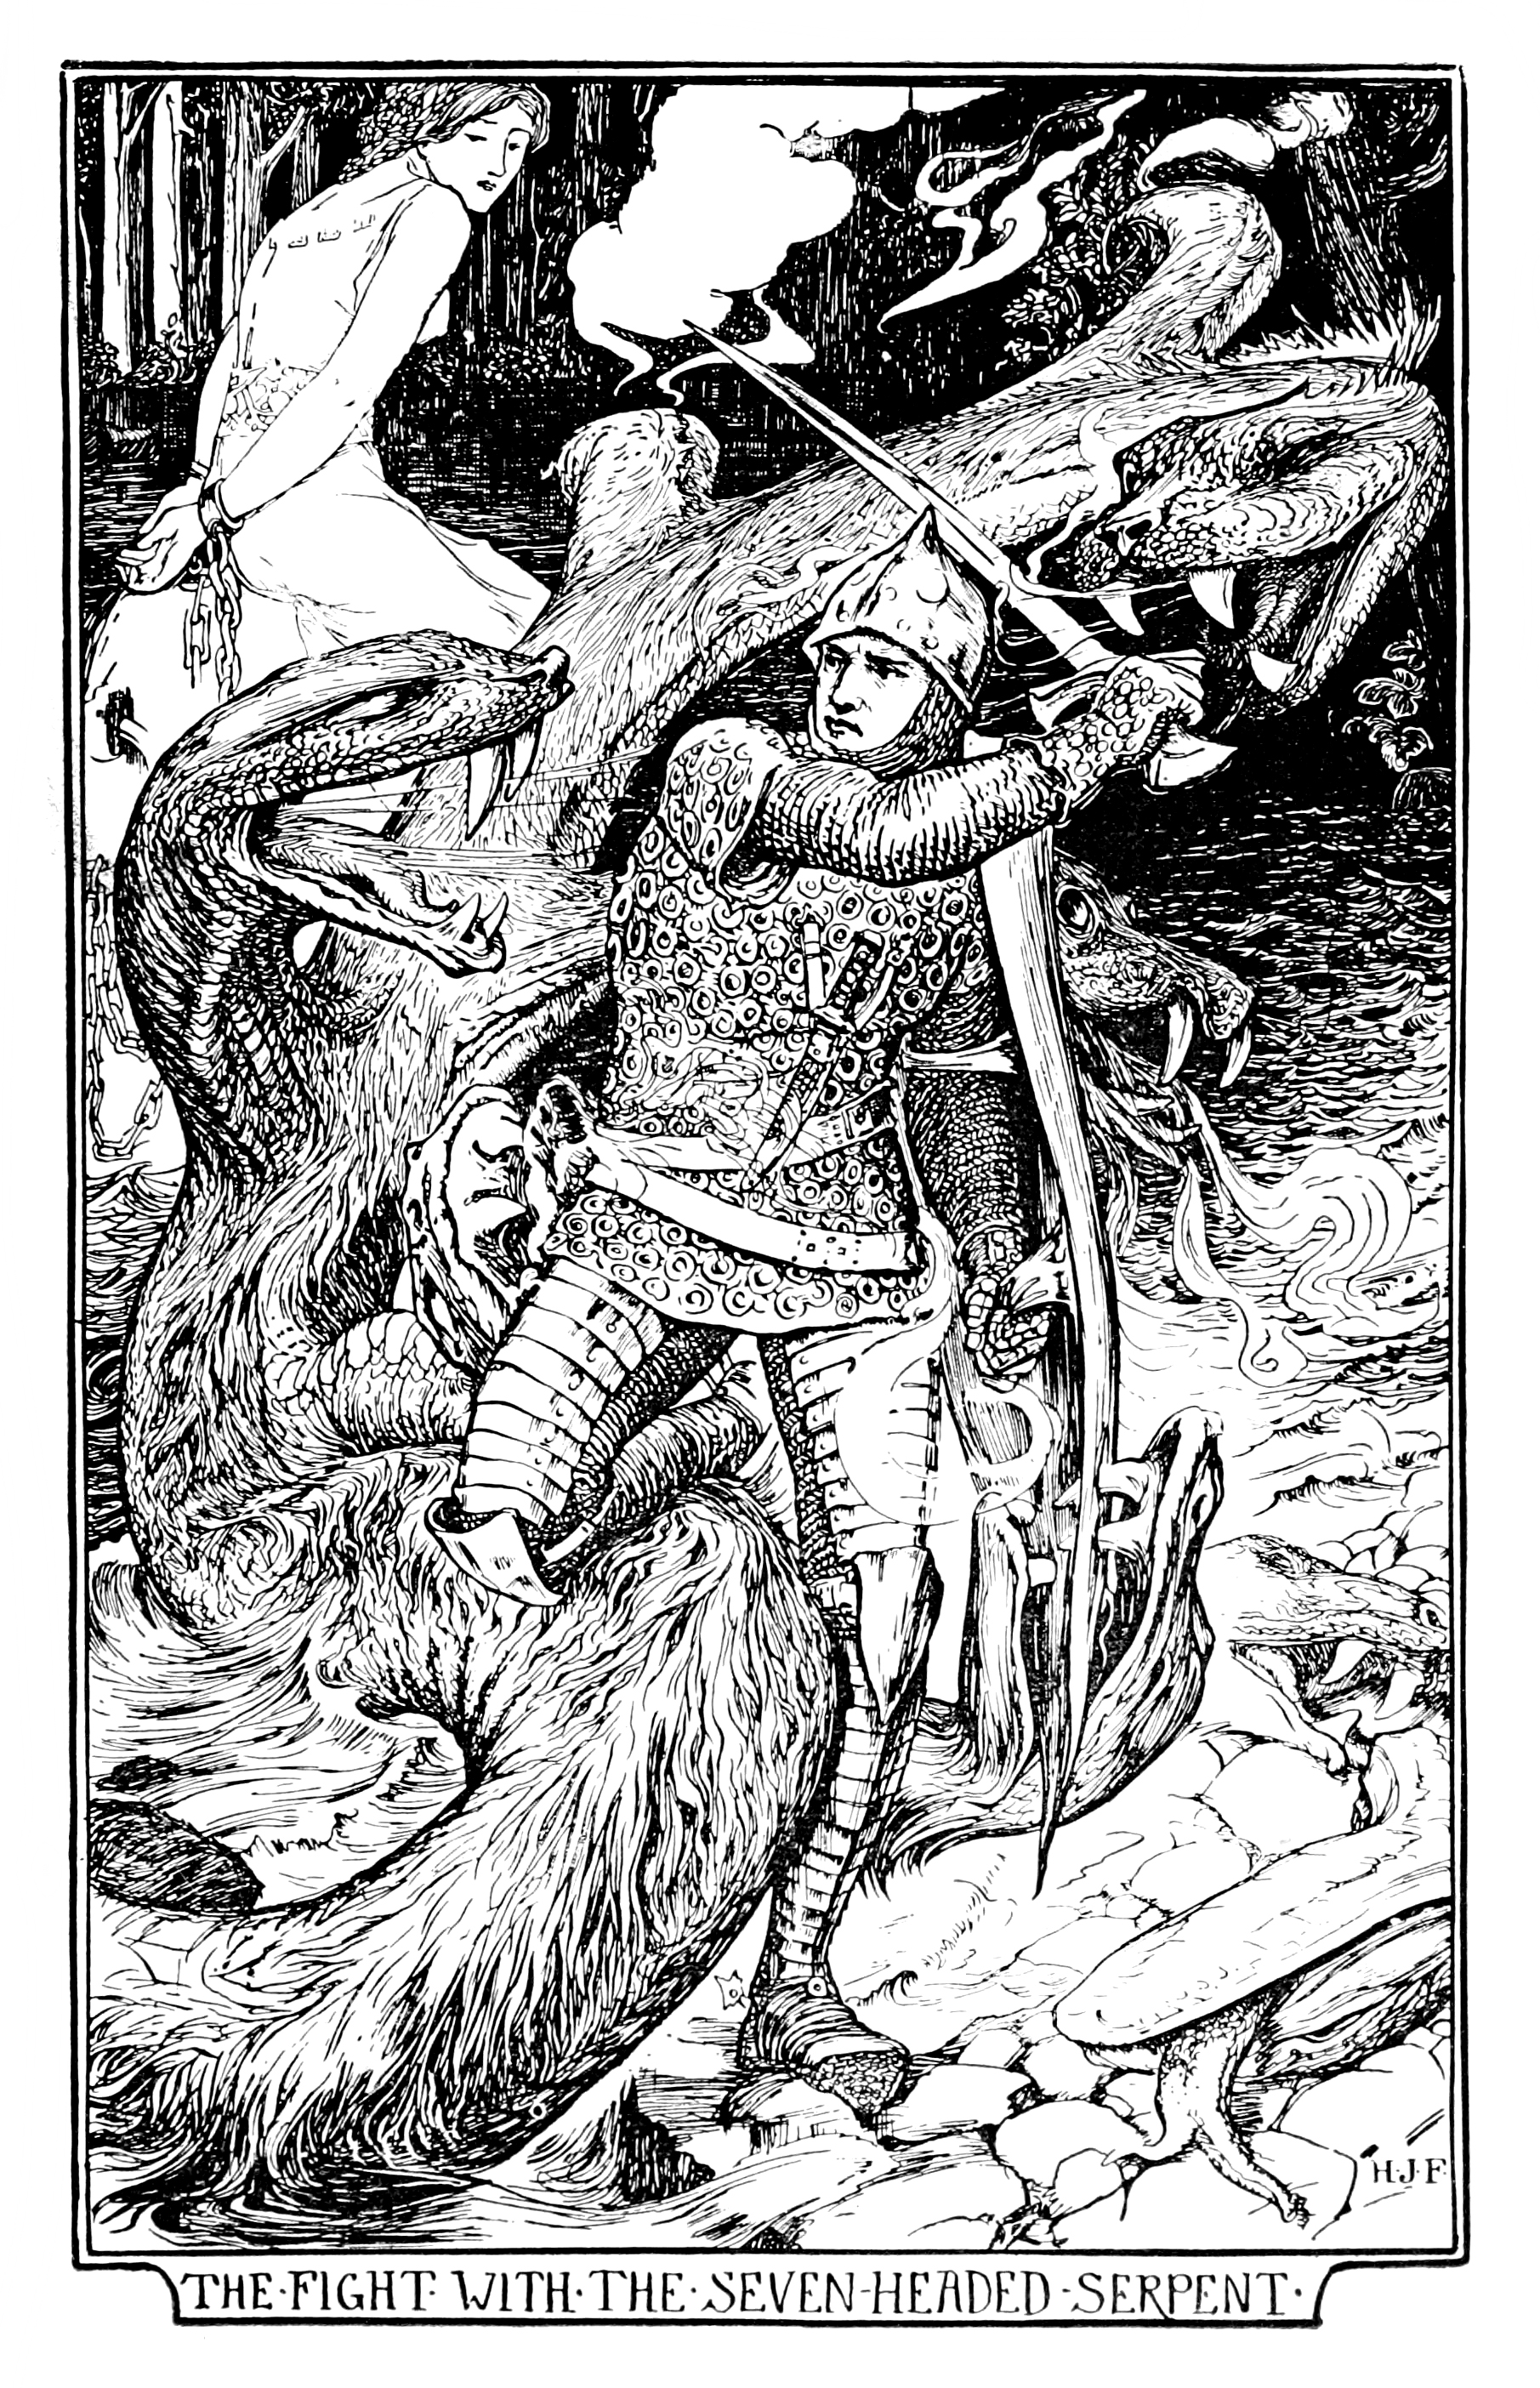 Henry Justice Ford - The pink fairy book, edited by Andrew Lang, 1897 (illustration 12)